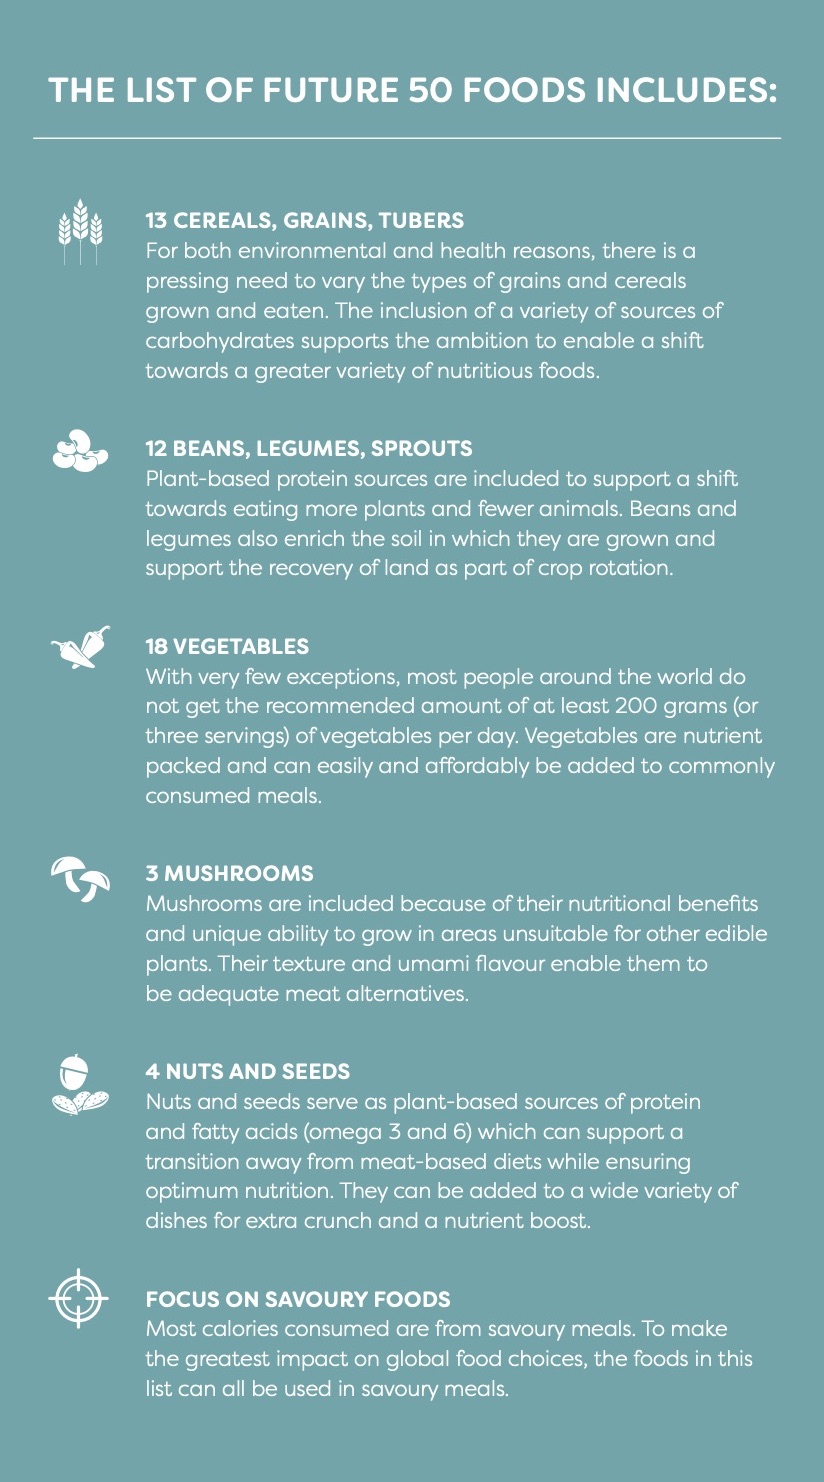 List of Future 50 Foods for healthier bodies and a healthier planet : a cheat sheet | see more tips at coolmomeats.com